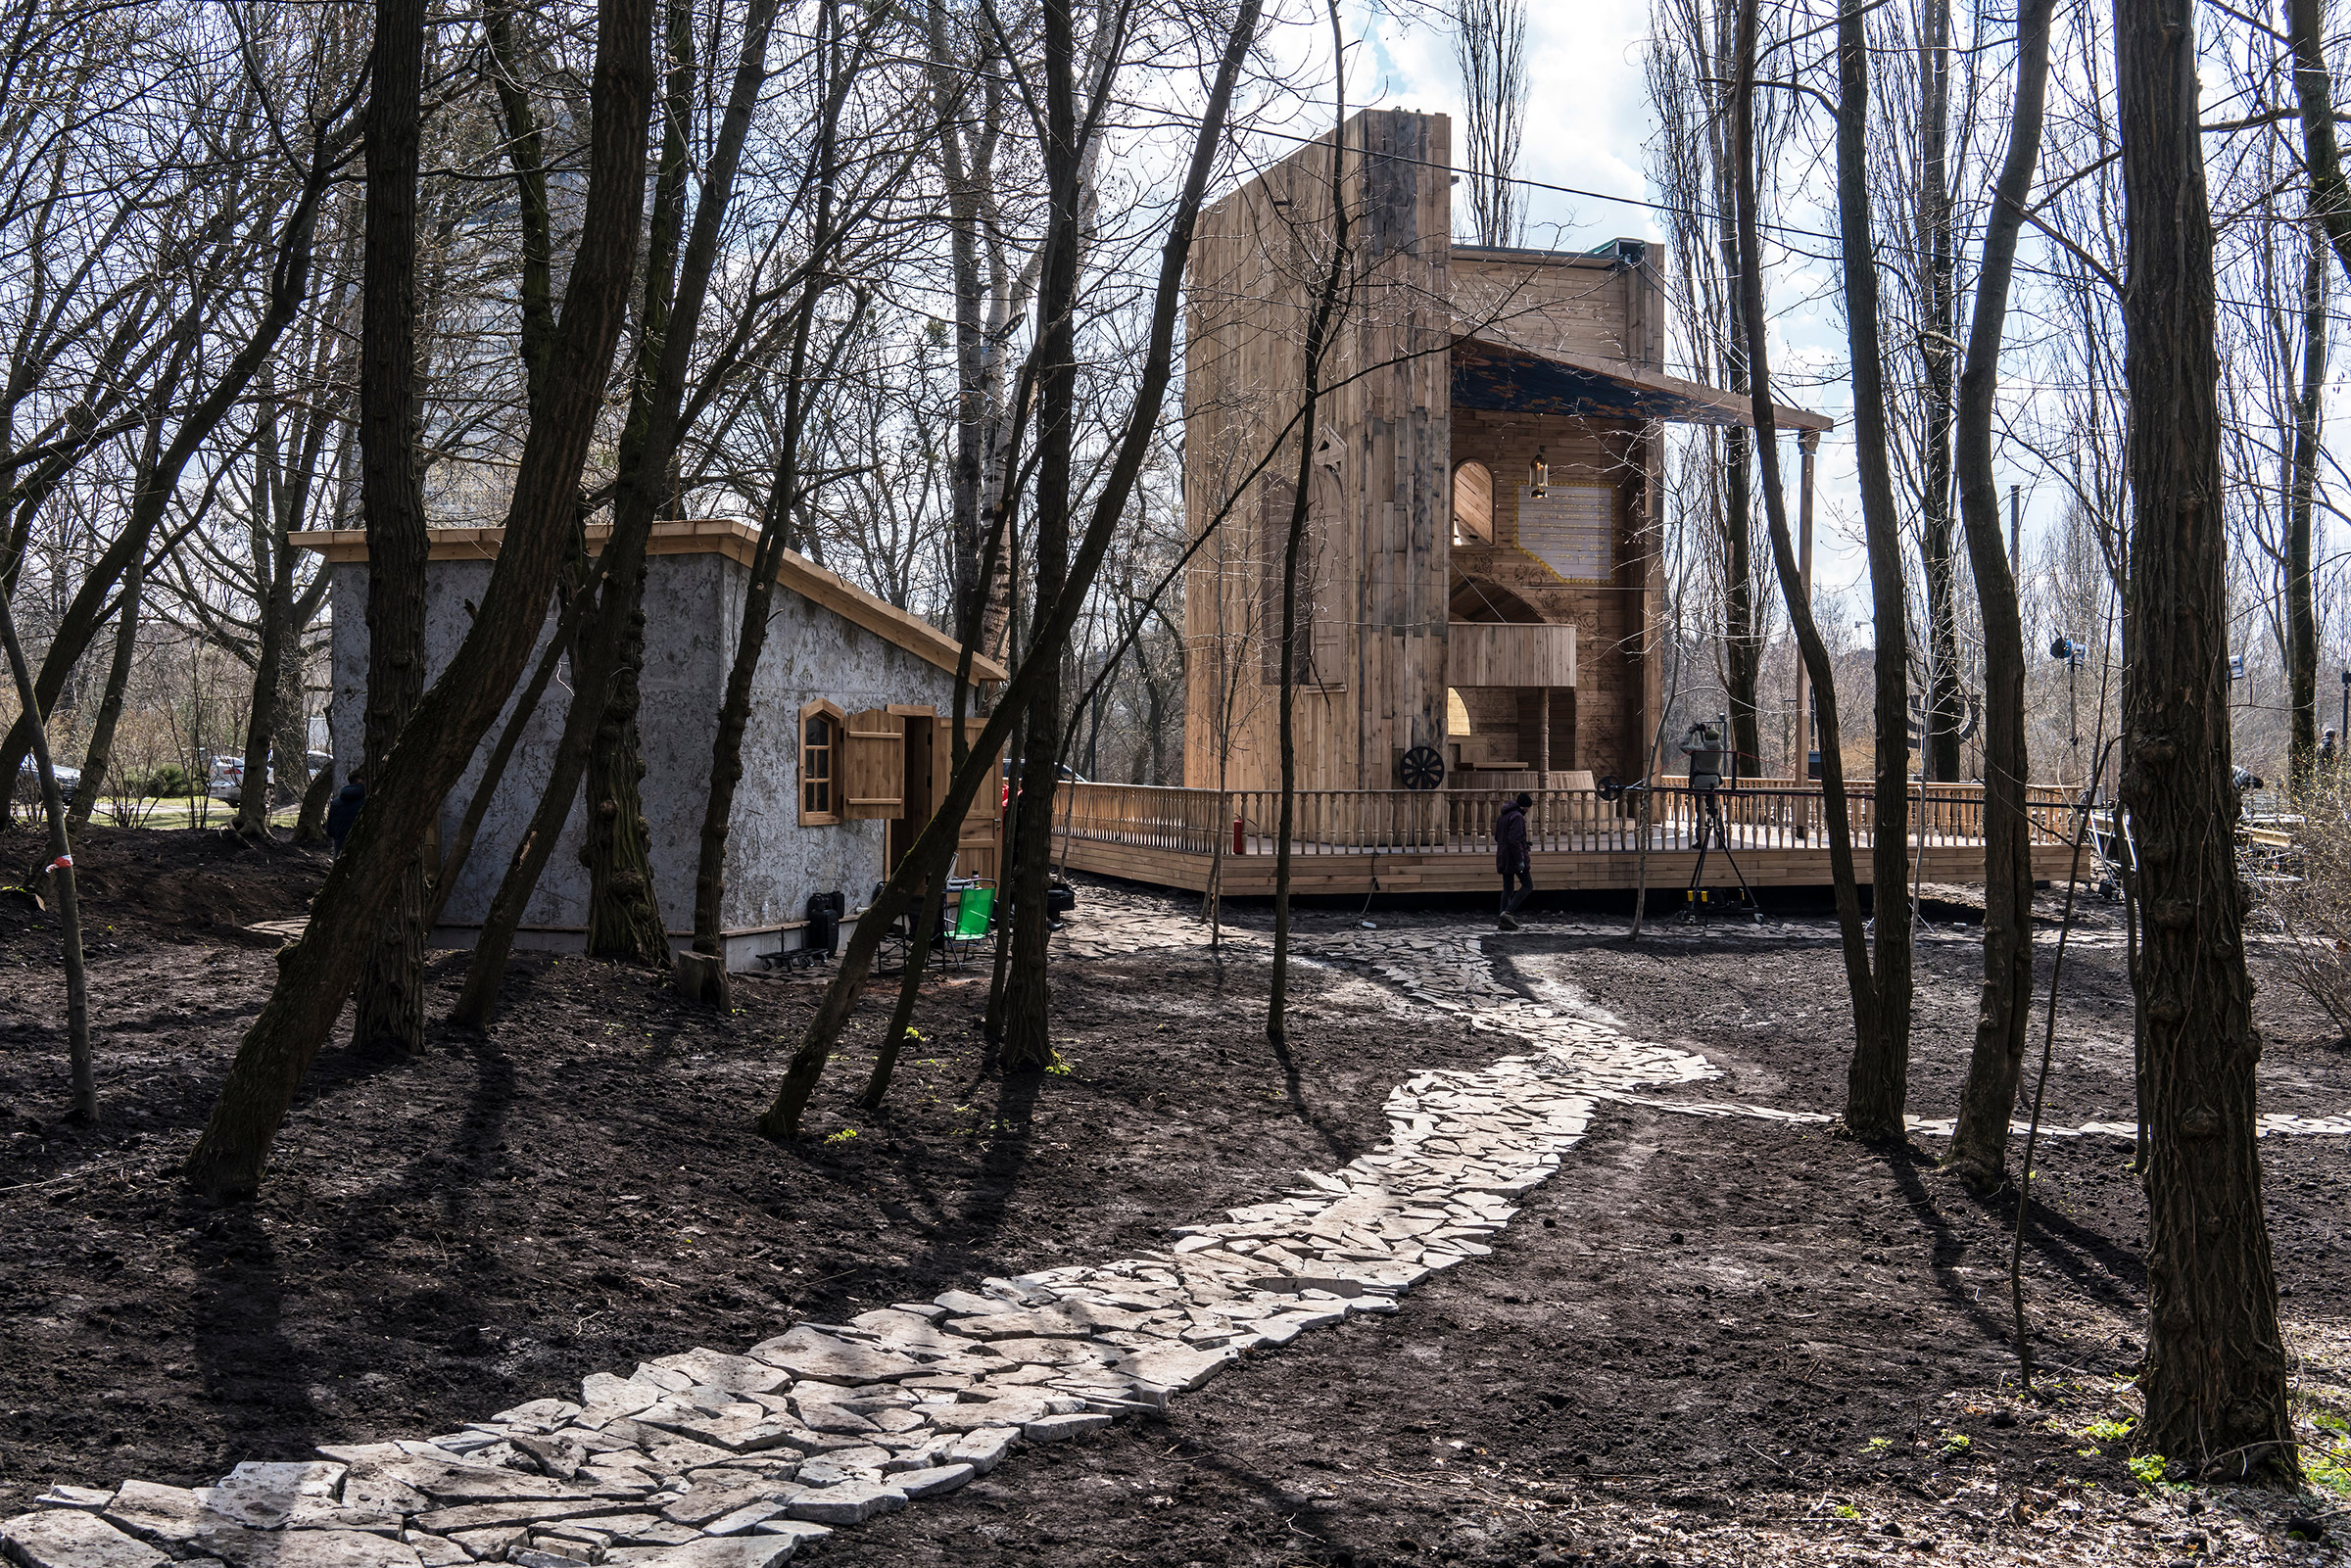 The wooden synagogue, shaped like a book, at the Babyn Yar Holocaust memorial in Kyiv (Brendan Hoffman for TIME)